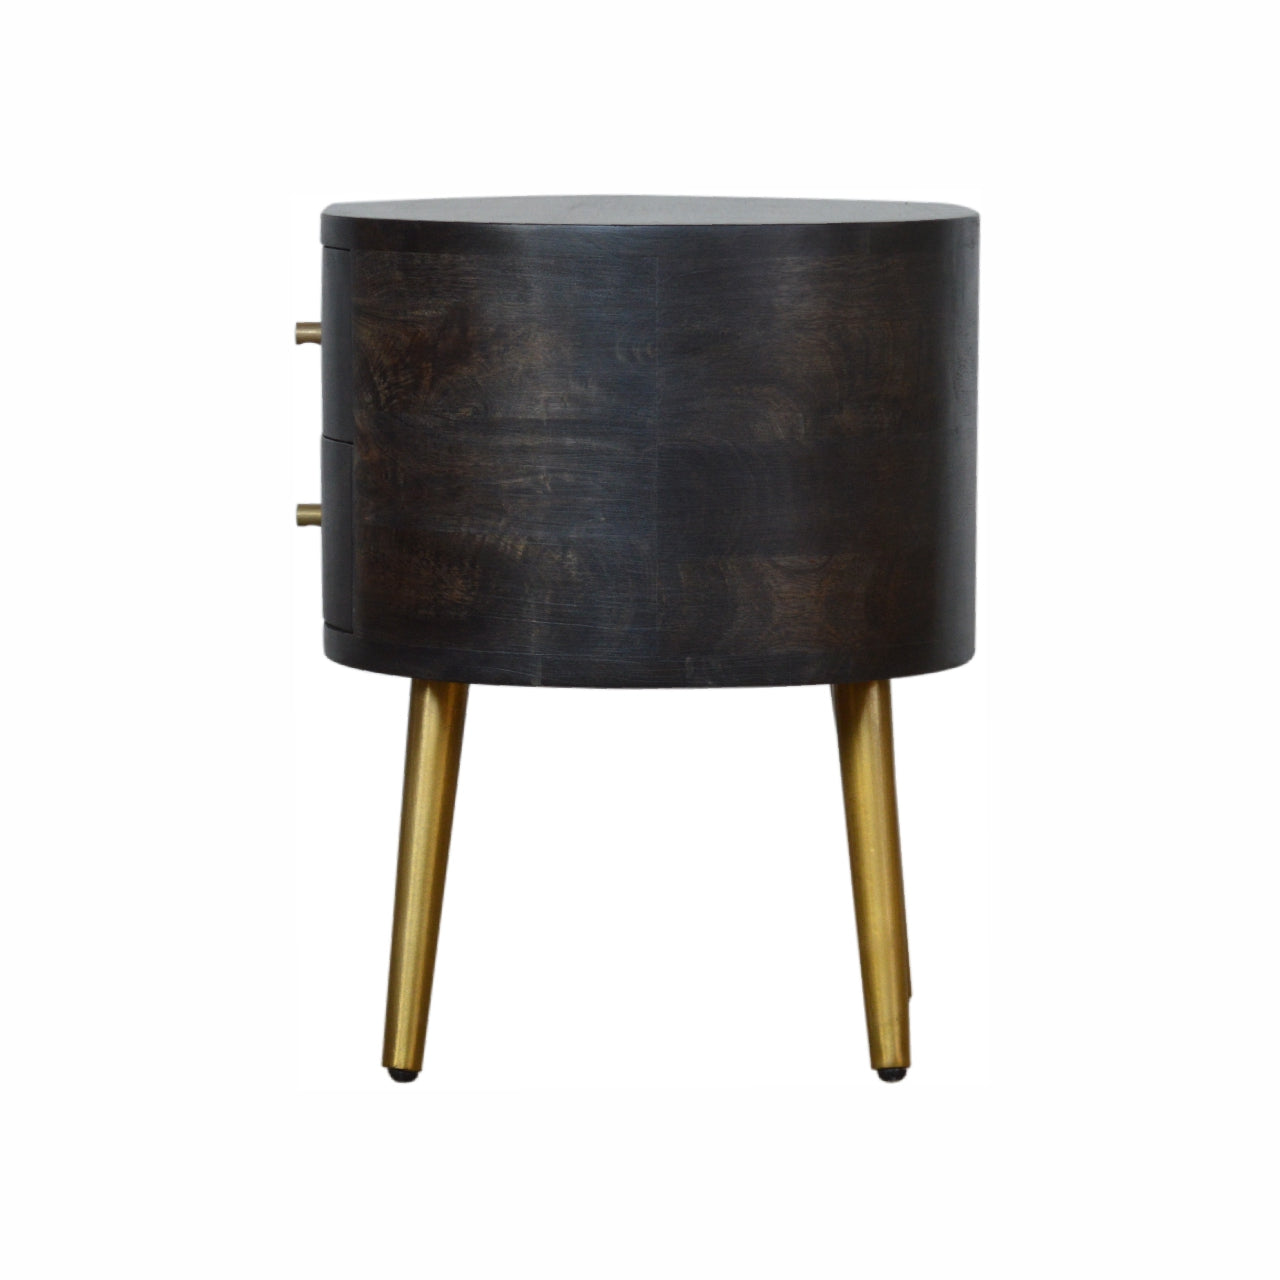 Ash Black Bedside Table with Brass Legs